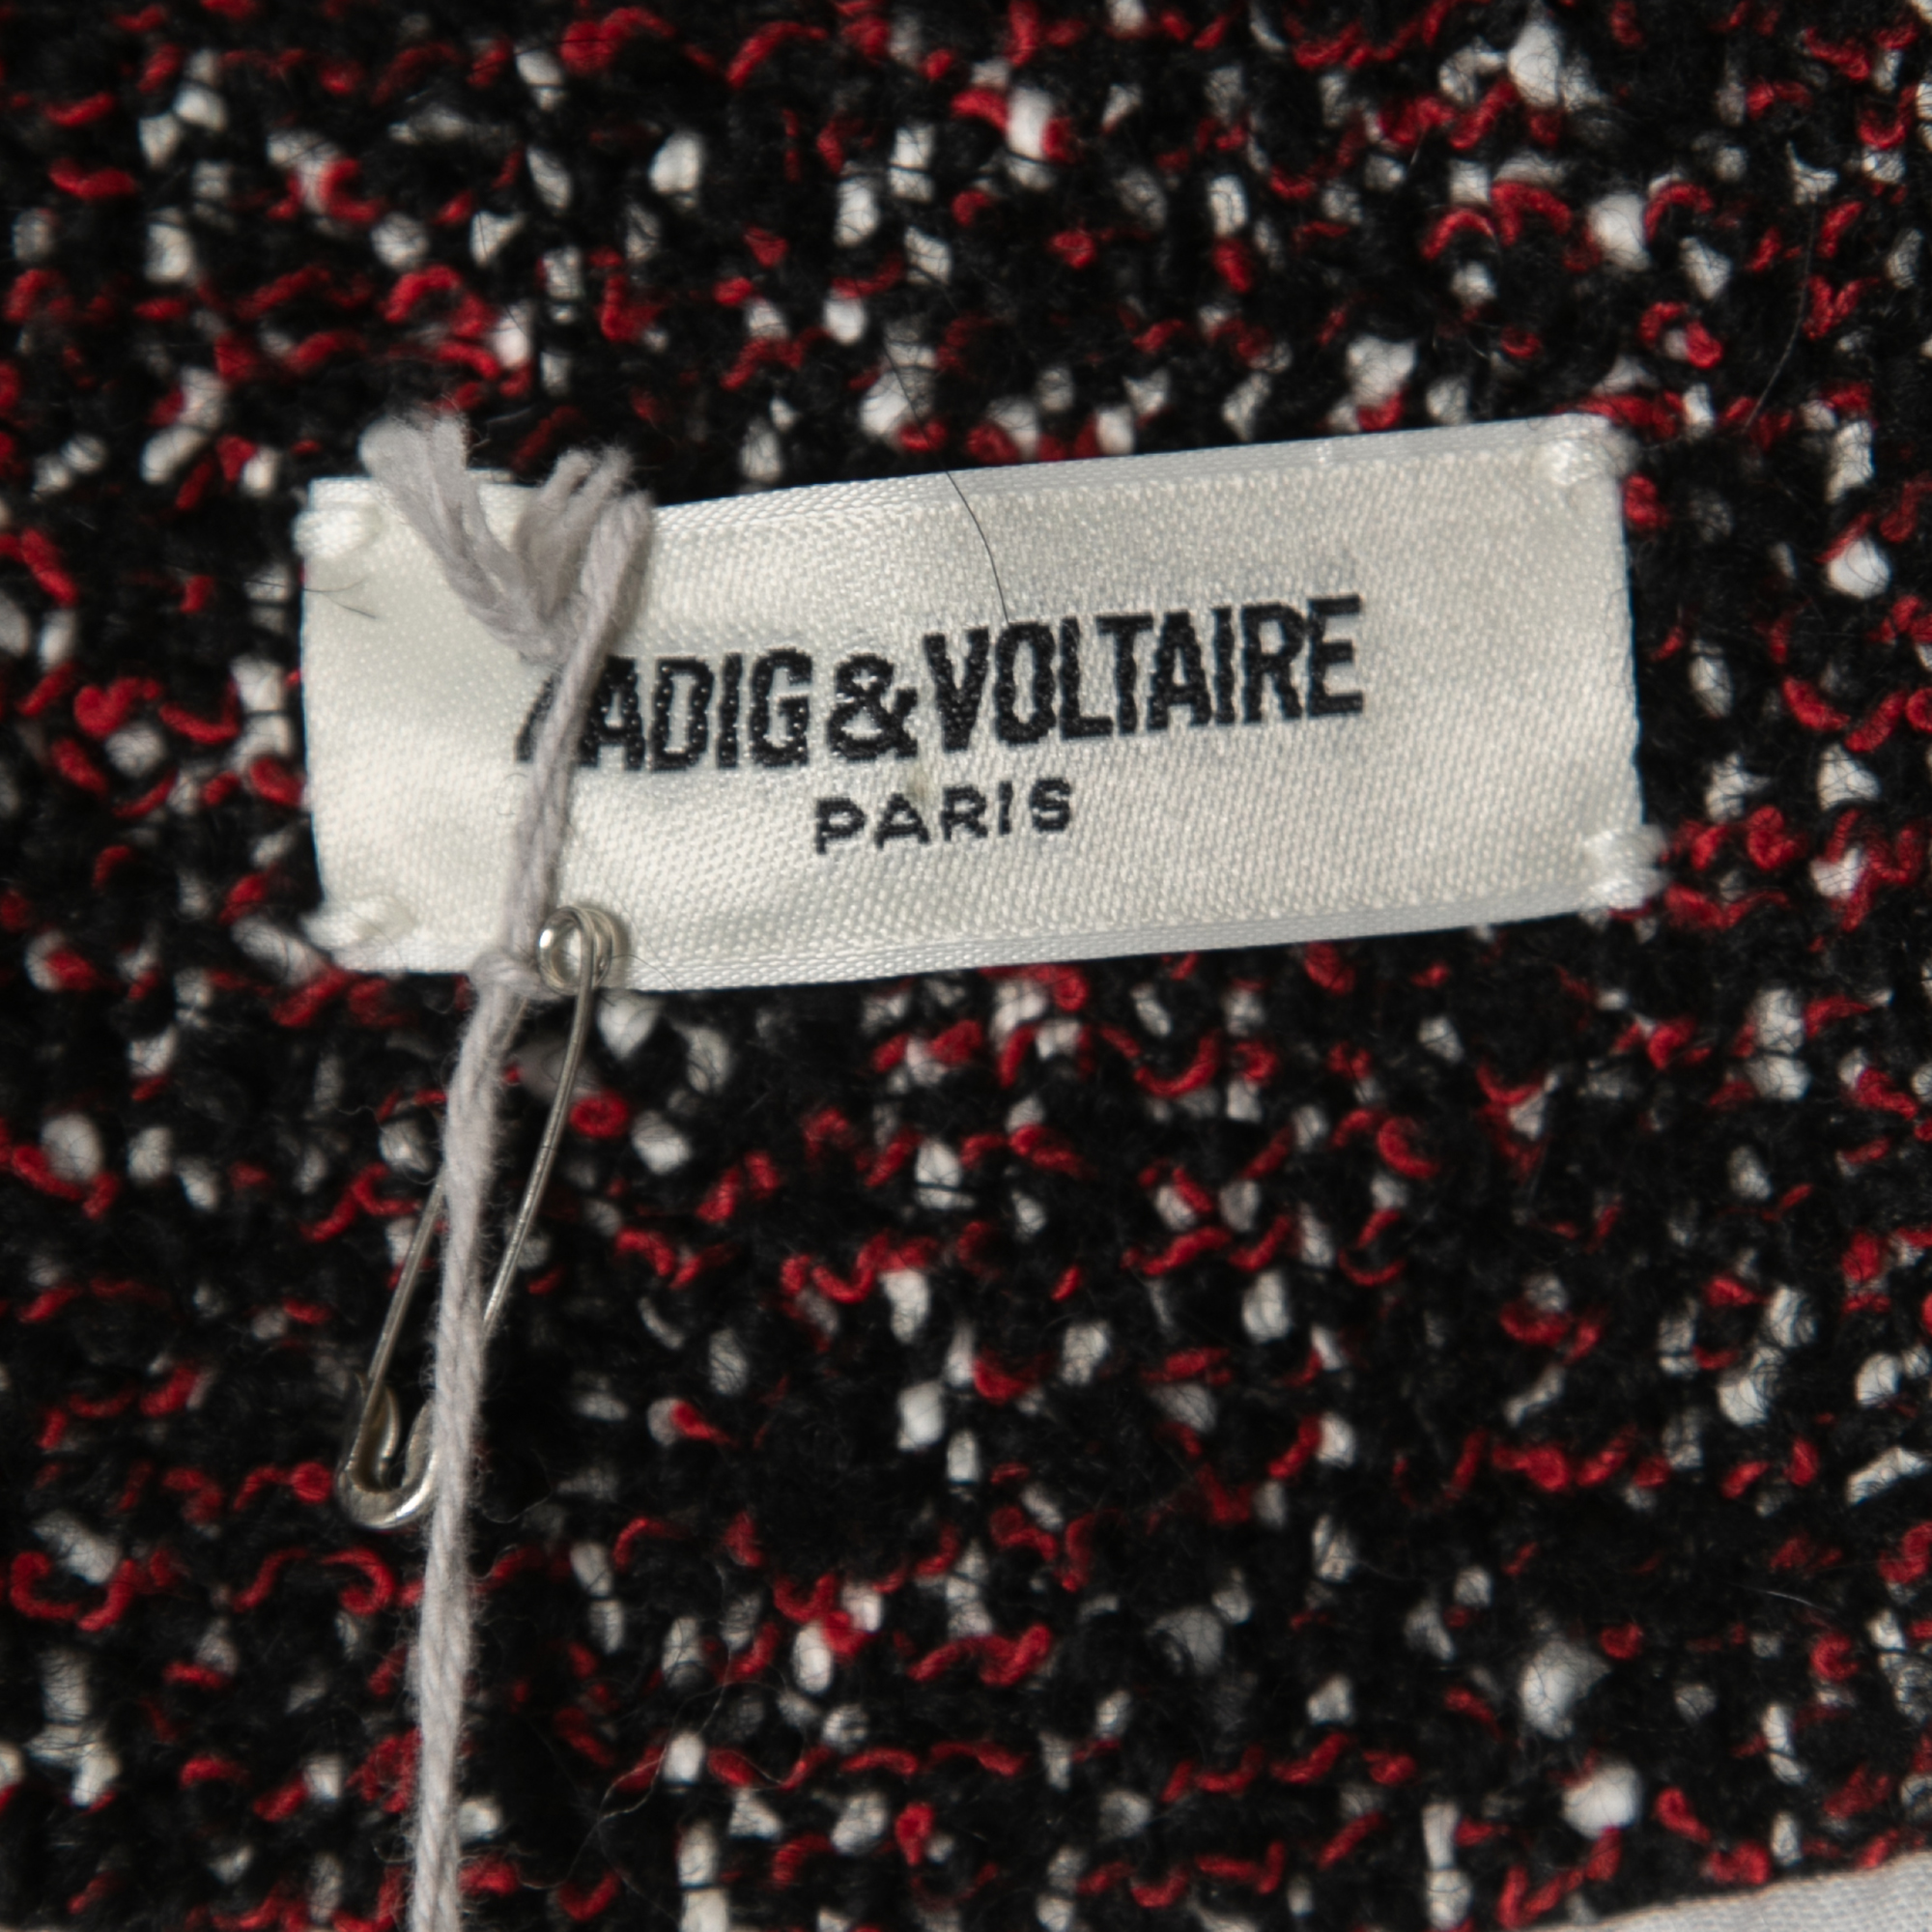 Zadig And Voltaire Black/Red Tweed Fringed Open Front Jacket M